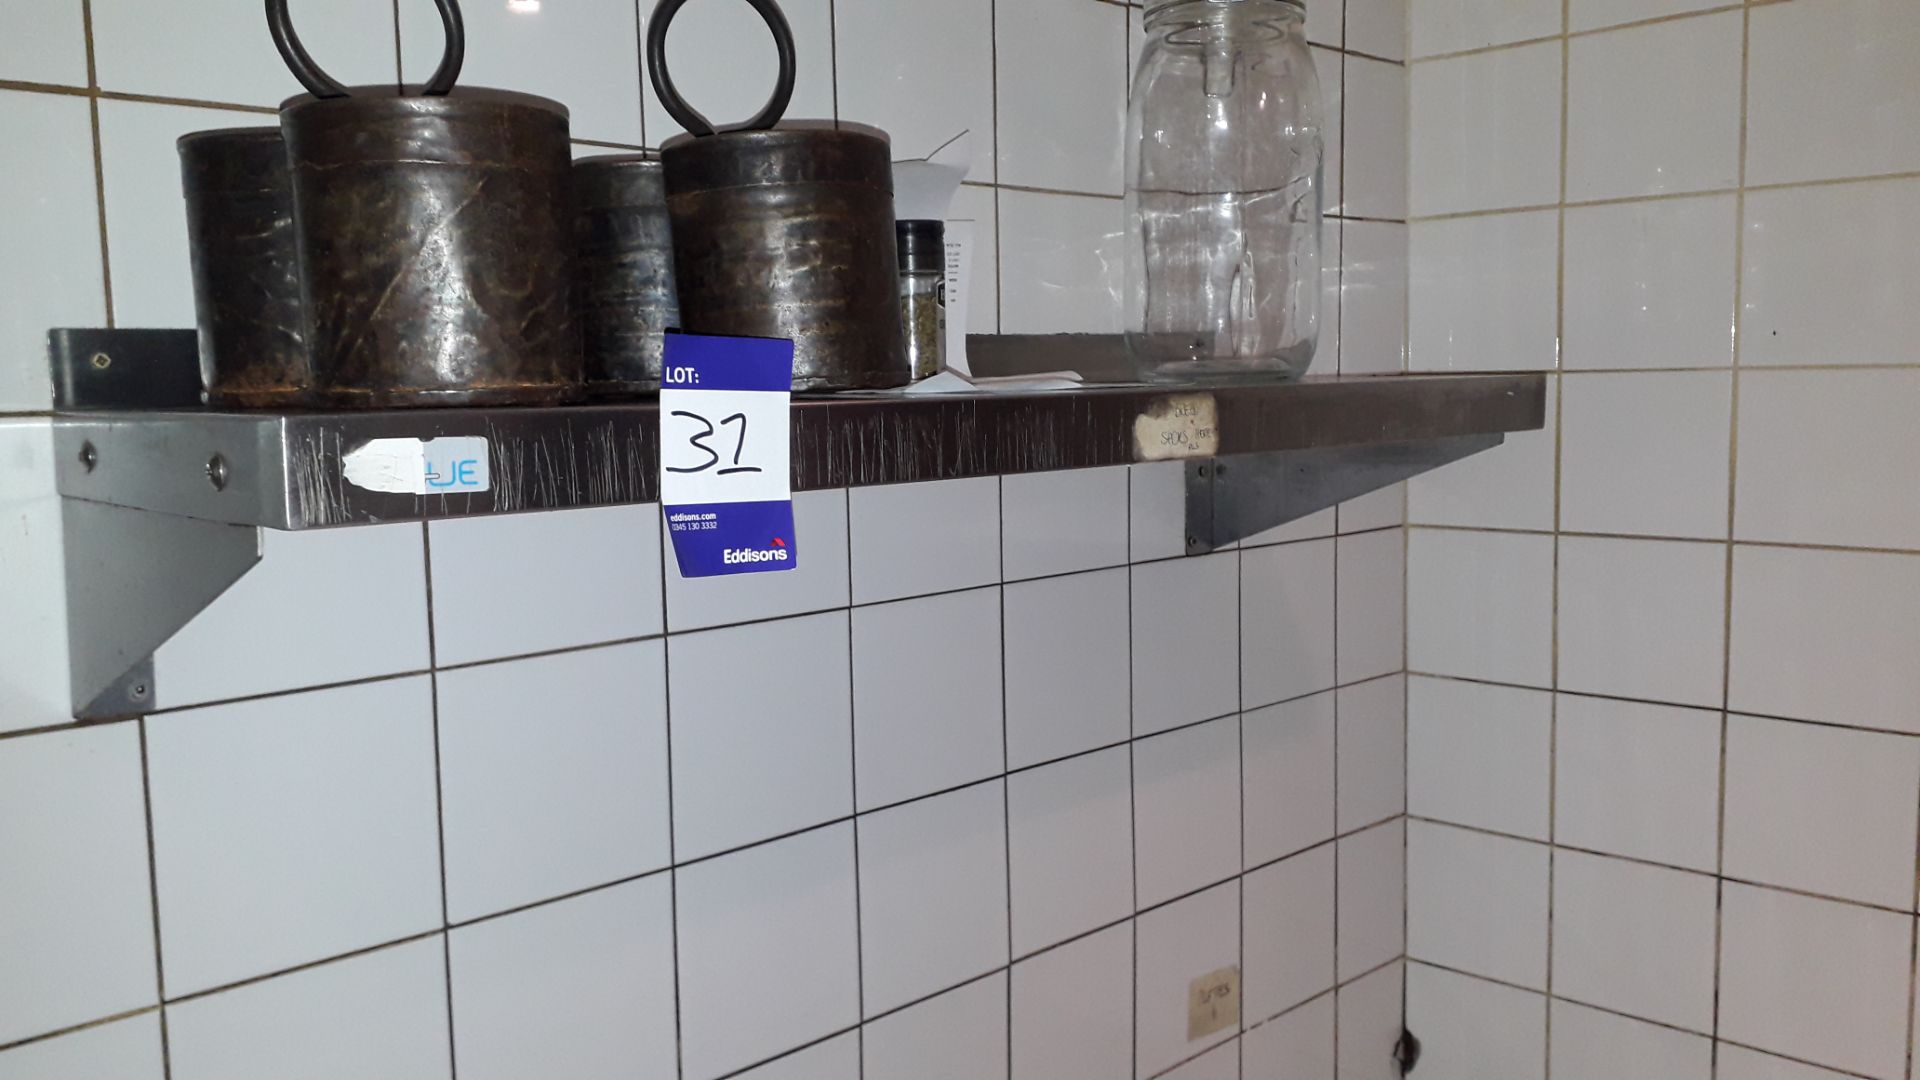 2 x Vogue Stainless Steel Wall Mount Shelves 1500 & 900mm - Image 2 of 2